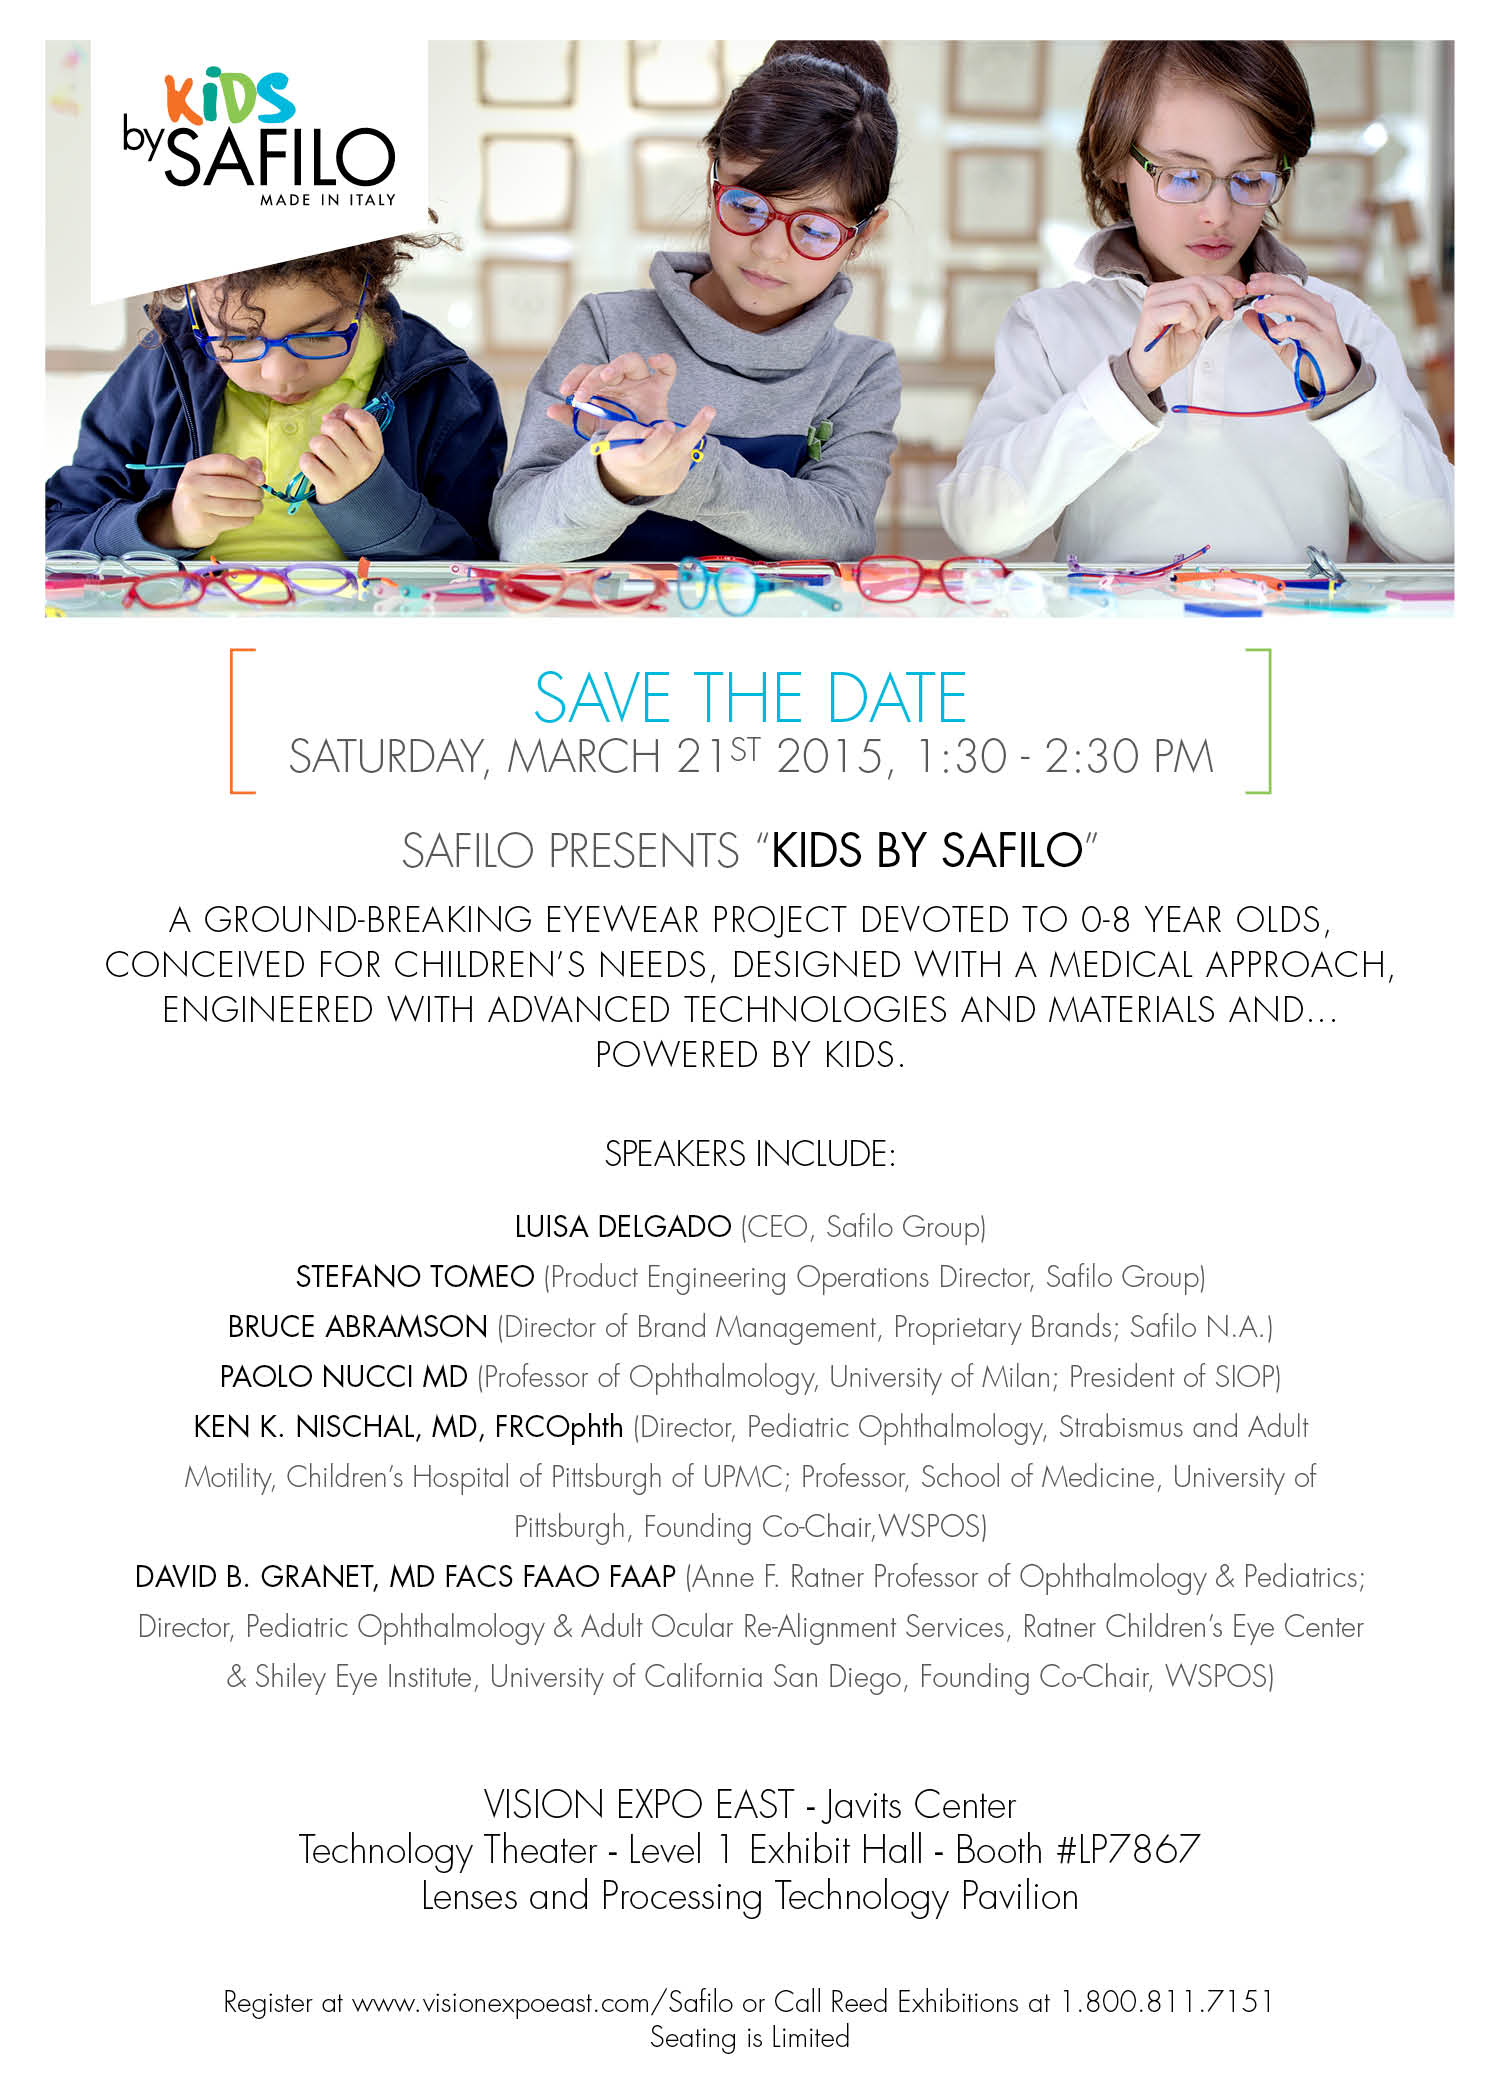 “Kids by Safilo” Program Coming to Vision Expo East